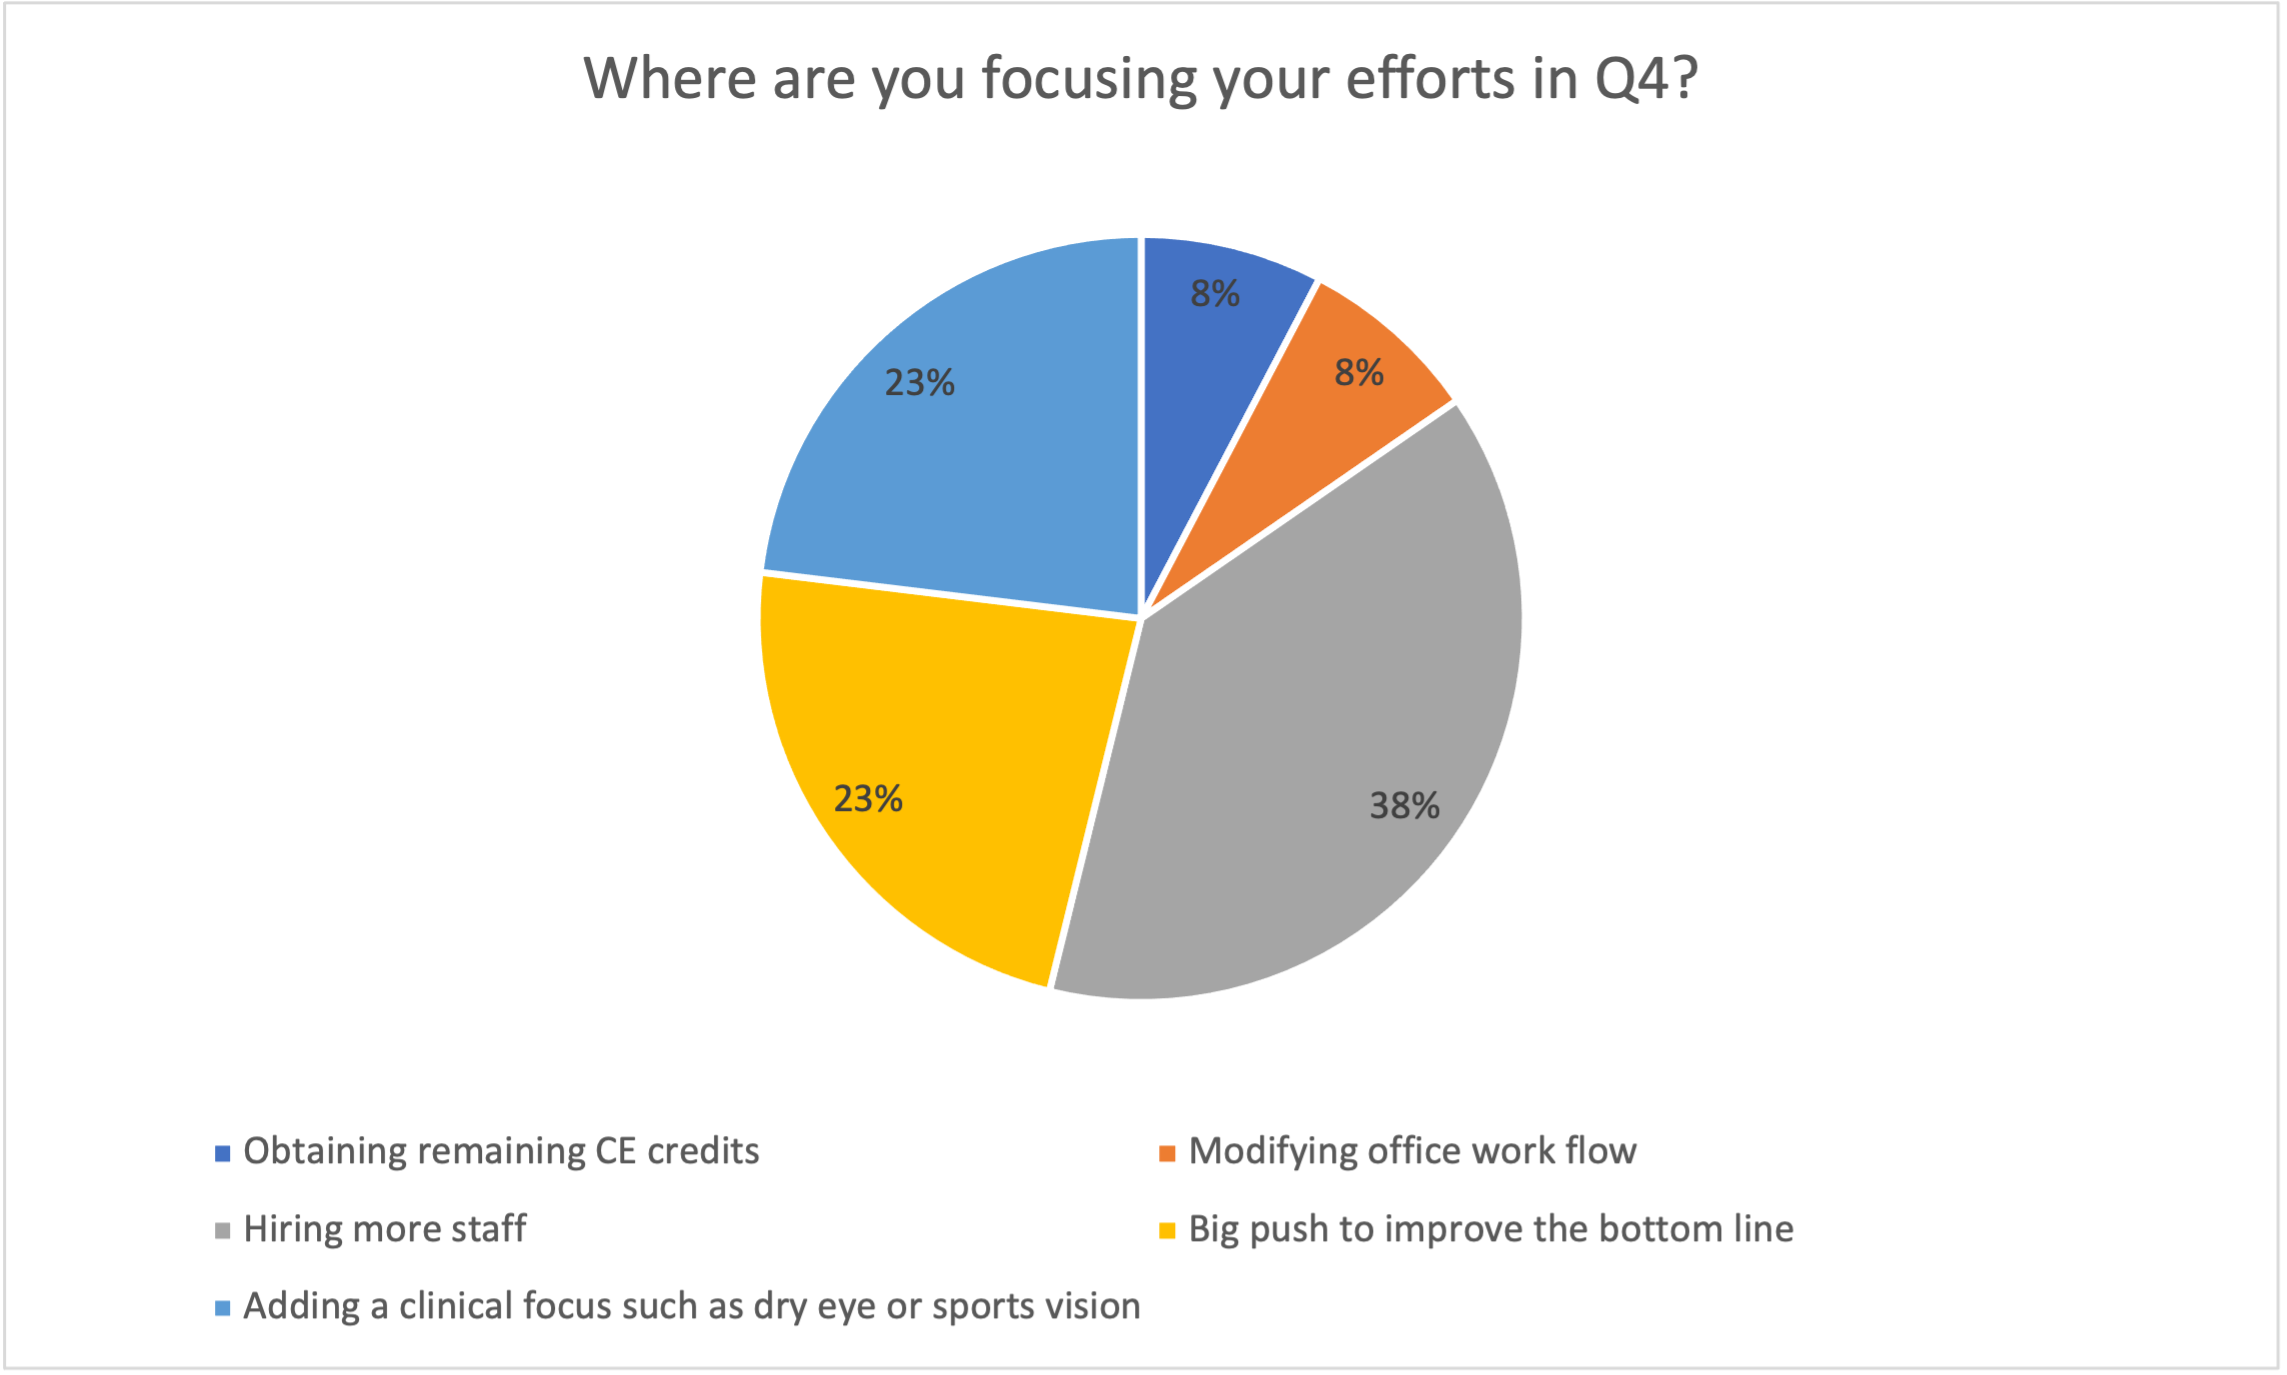 Poll results: Where are you focusing your efforts in Q4?